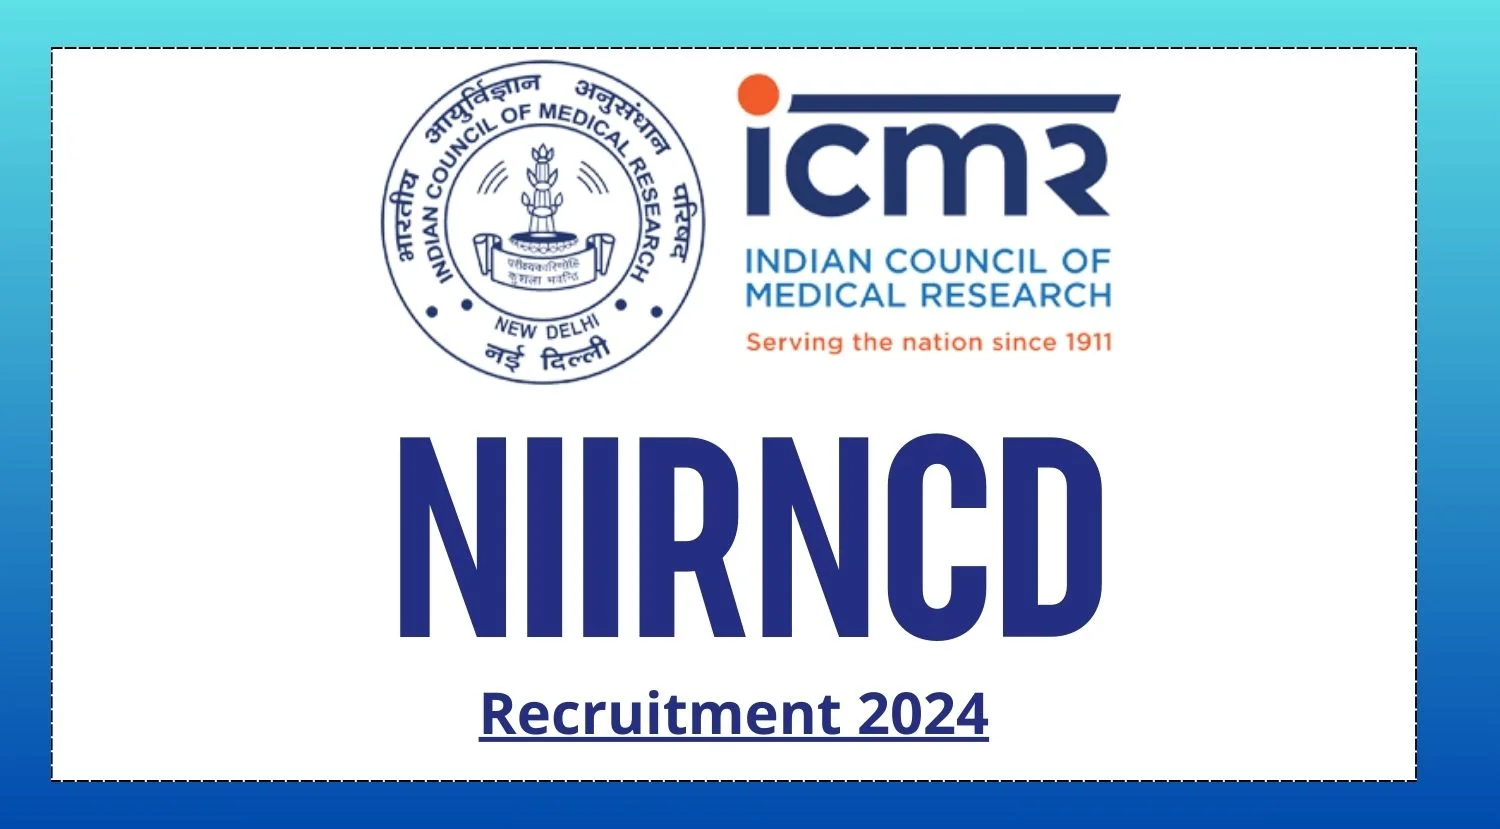 ICMR-NIIRNCD Recruitment 2024 Notification Out Check Eligibility Criteria and Walk-in Details